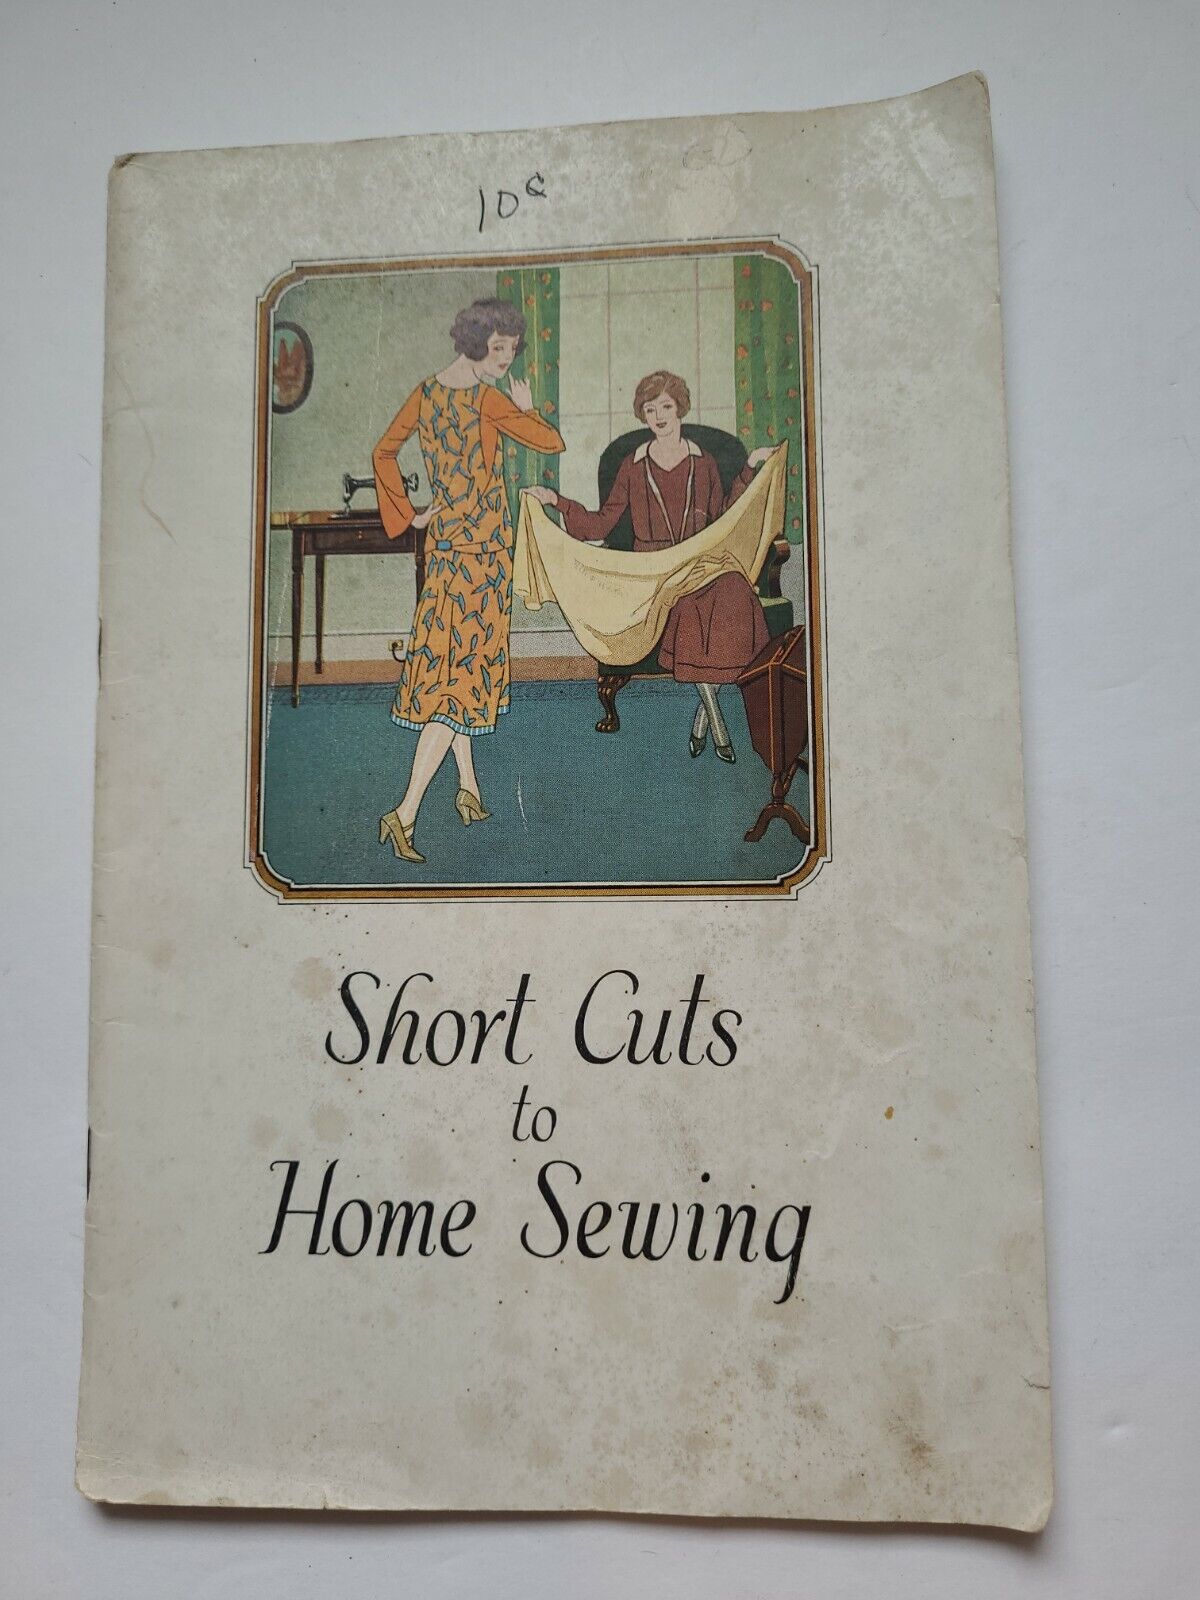 Singer Sewing Machine Company Short Cuts To Home Sewing Booklet Dated 1926